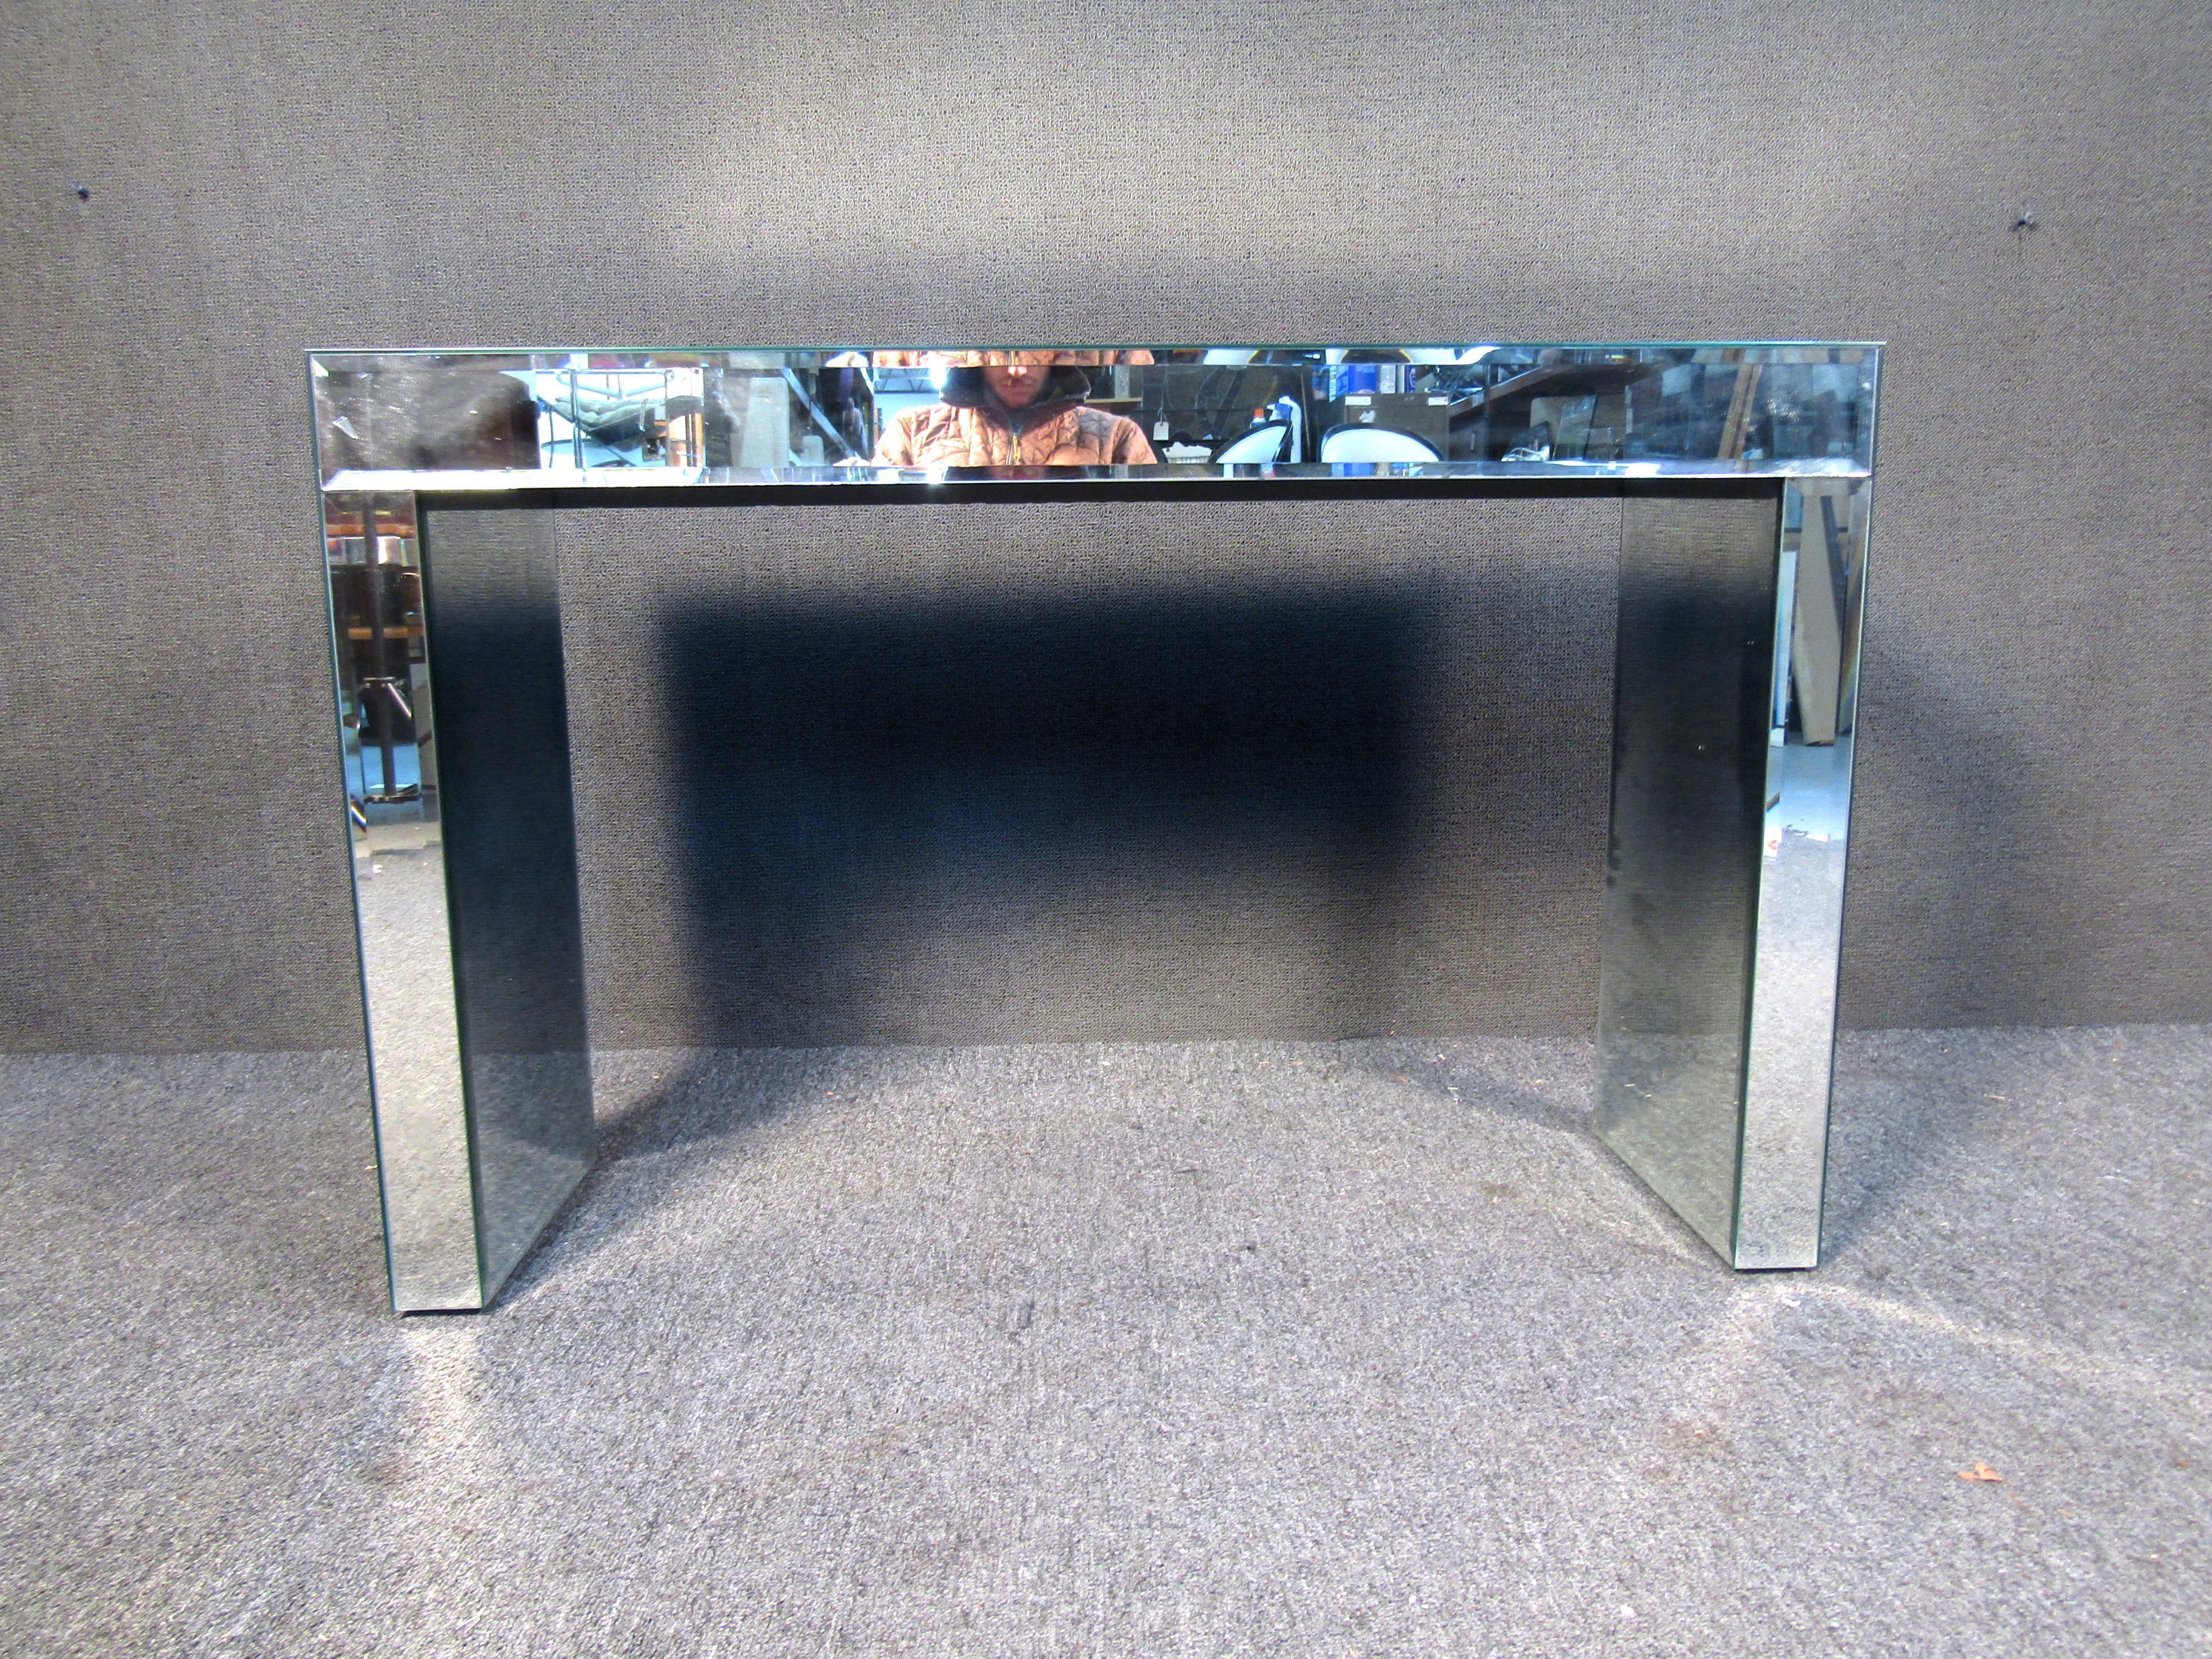 This unique mirror glass console table features sleek glass top and mirrored pedestal base. The perfect table for entryway, hall, or office display. Please confirm item location (NY or NJ.).